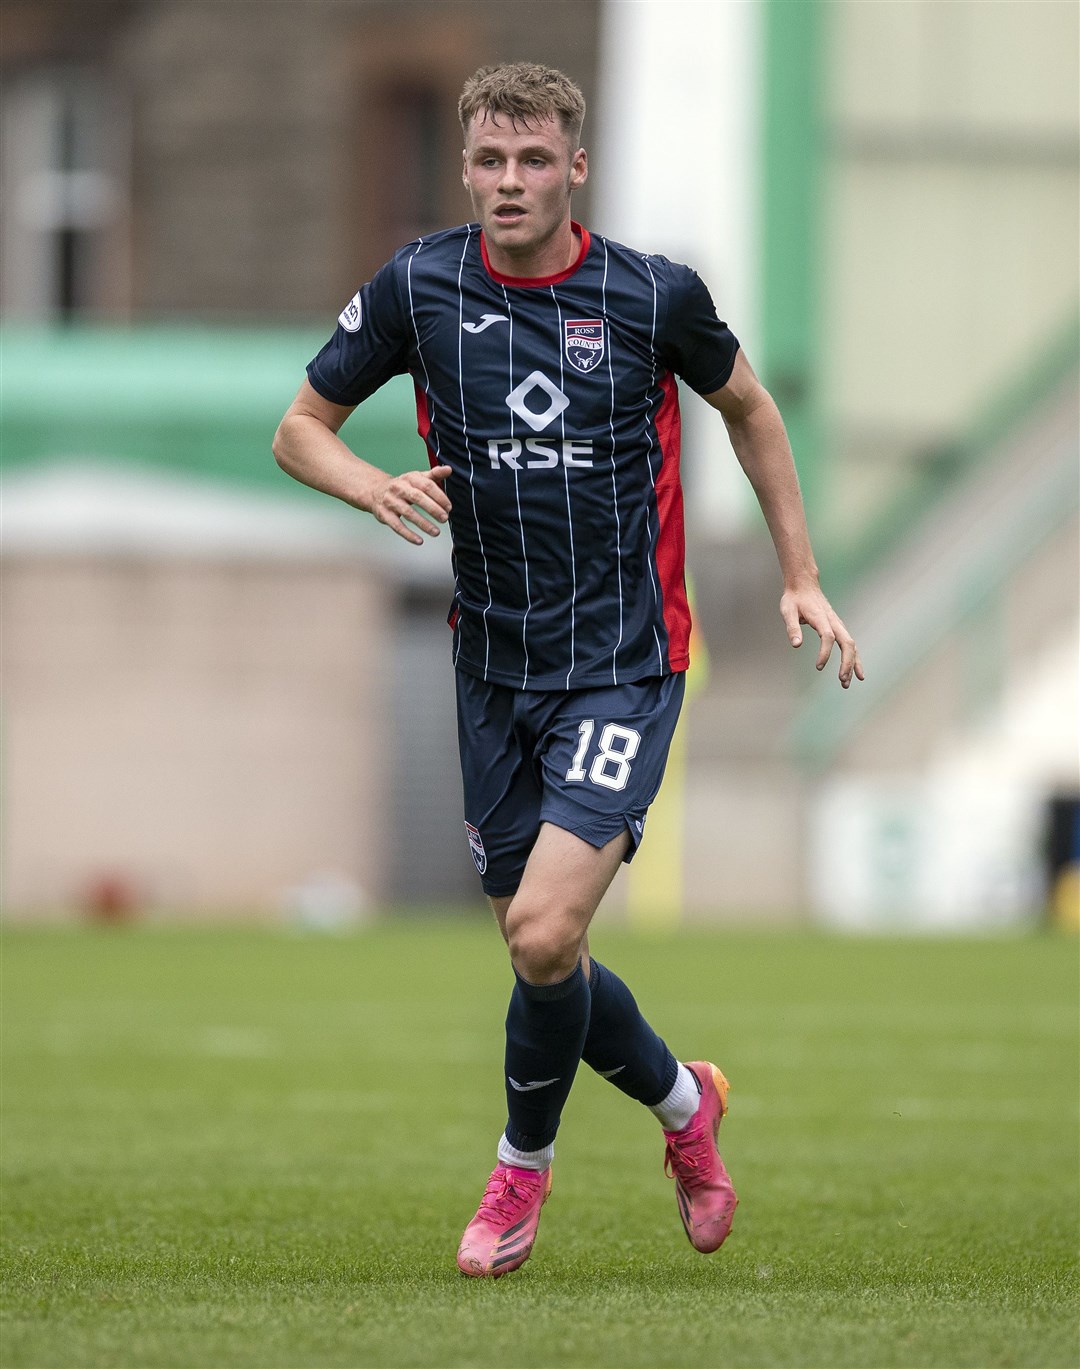 Picture - Ken Macpherson, Inverness. Hibs(3) v Ross County(0). 08.08.21. Ross County's Jack Burroughs.